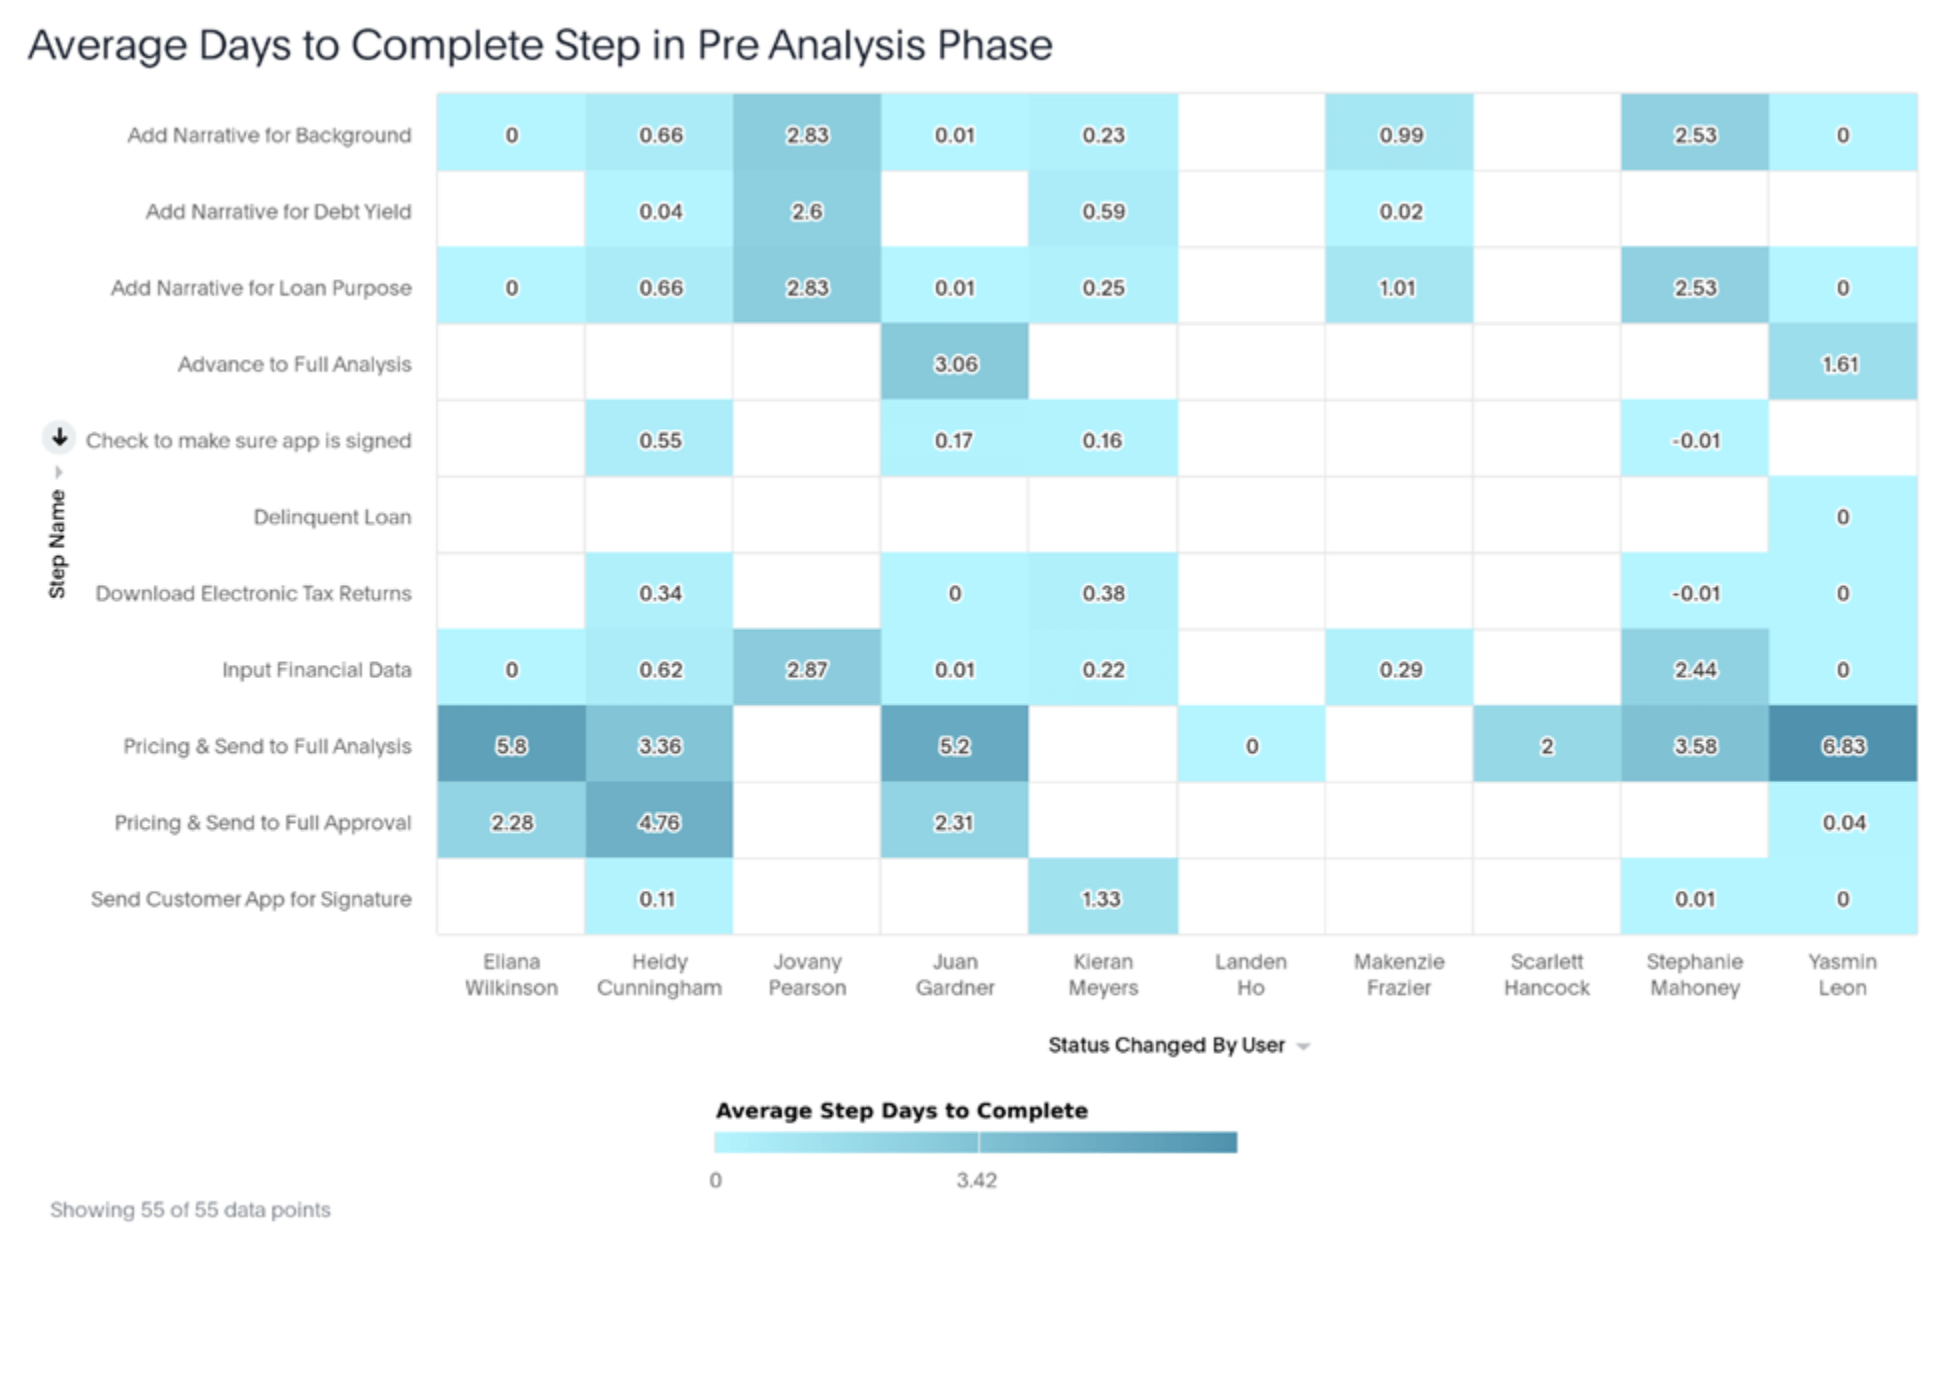 A dashboard for lending leaders to analyze workflow efficiencies by employee